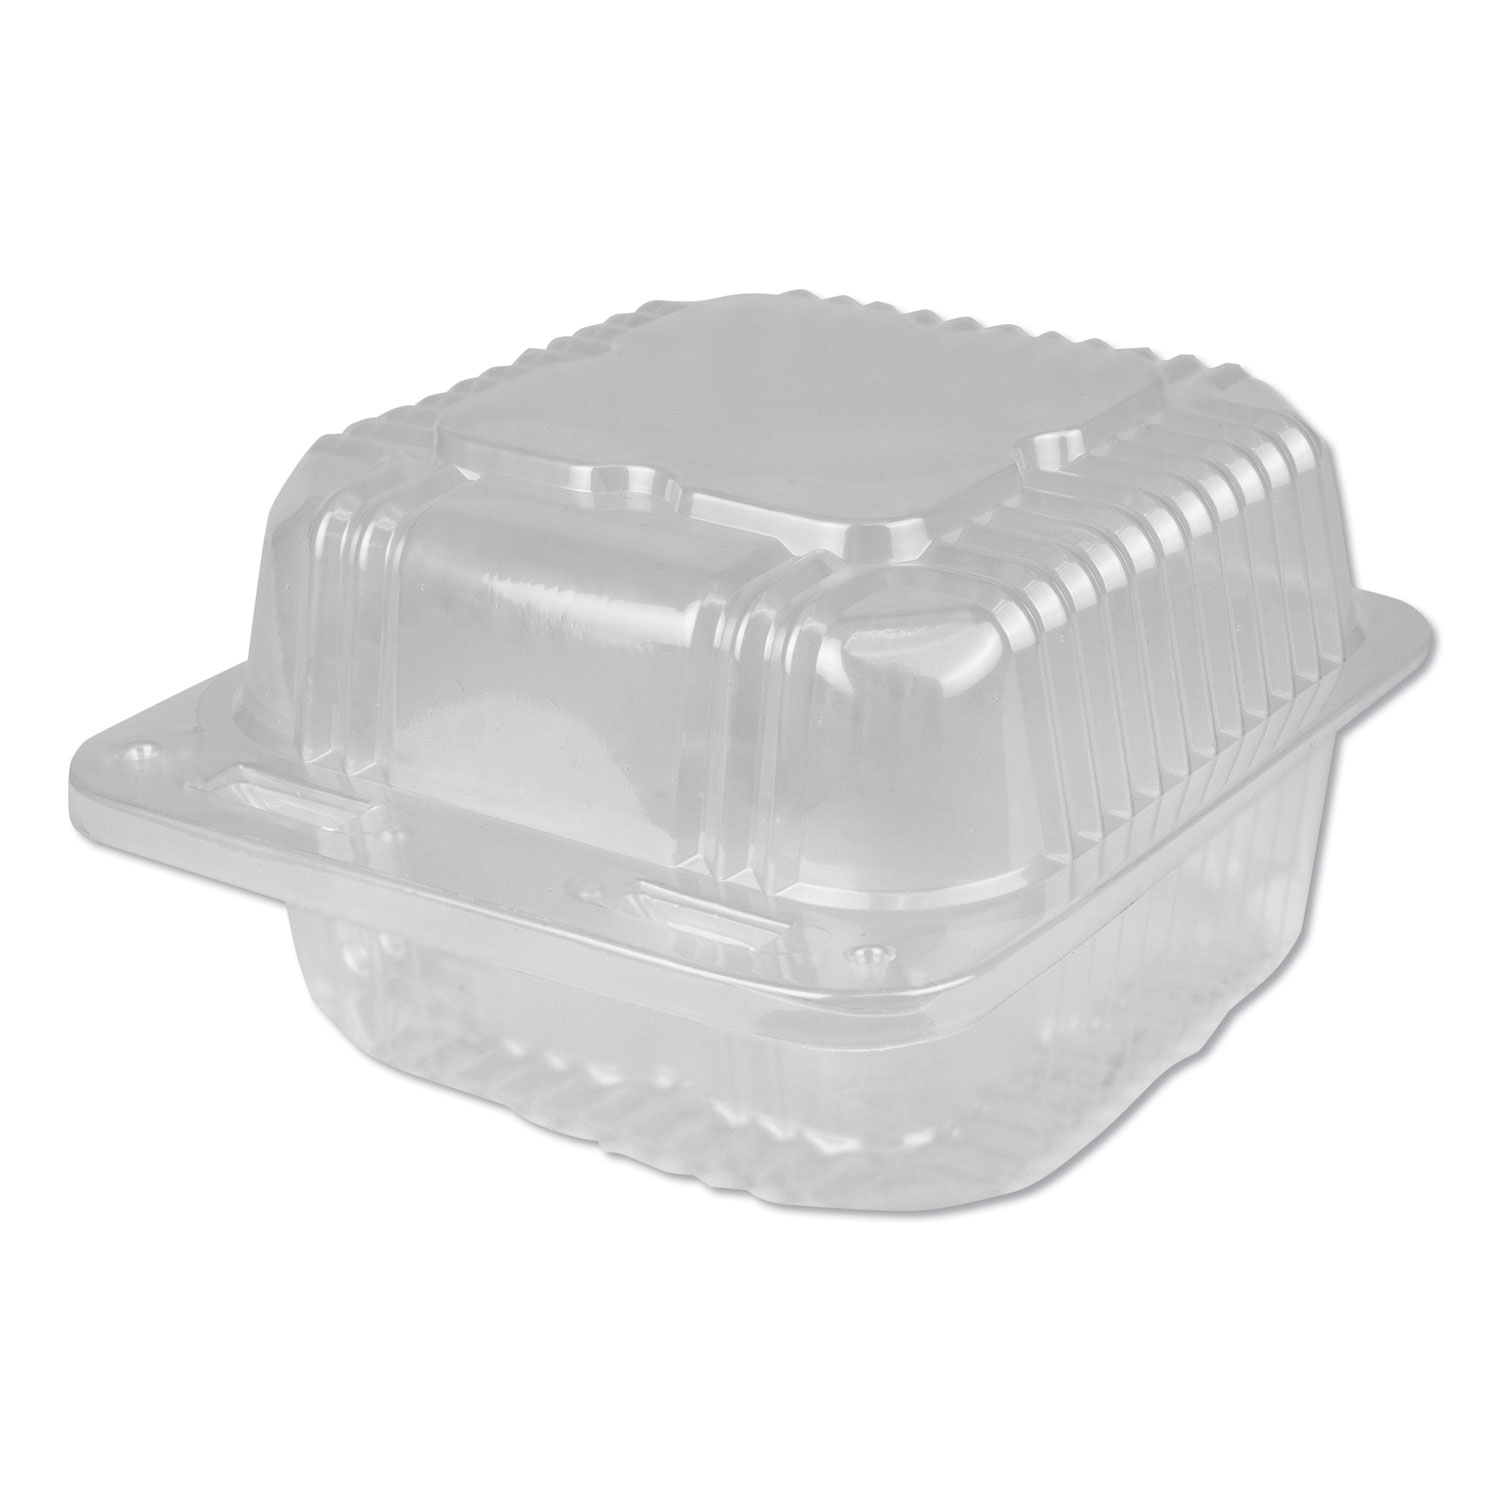  Durable Packaging PXT11600 Plastic Clear Hinged Containers, 6 x 6, 21 oz, Clear, 500/Carton (DPKPXT11600) 